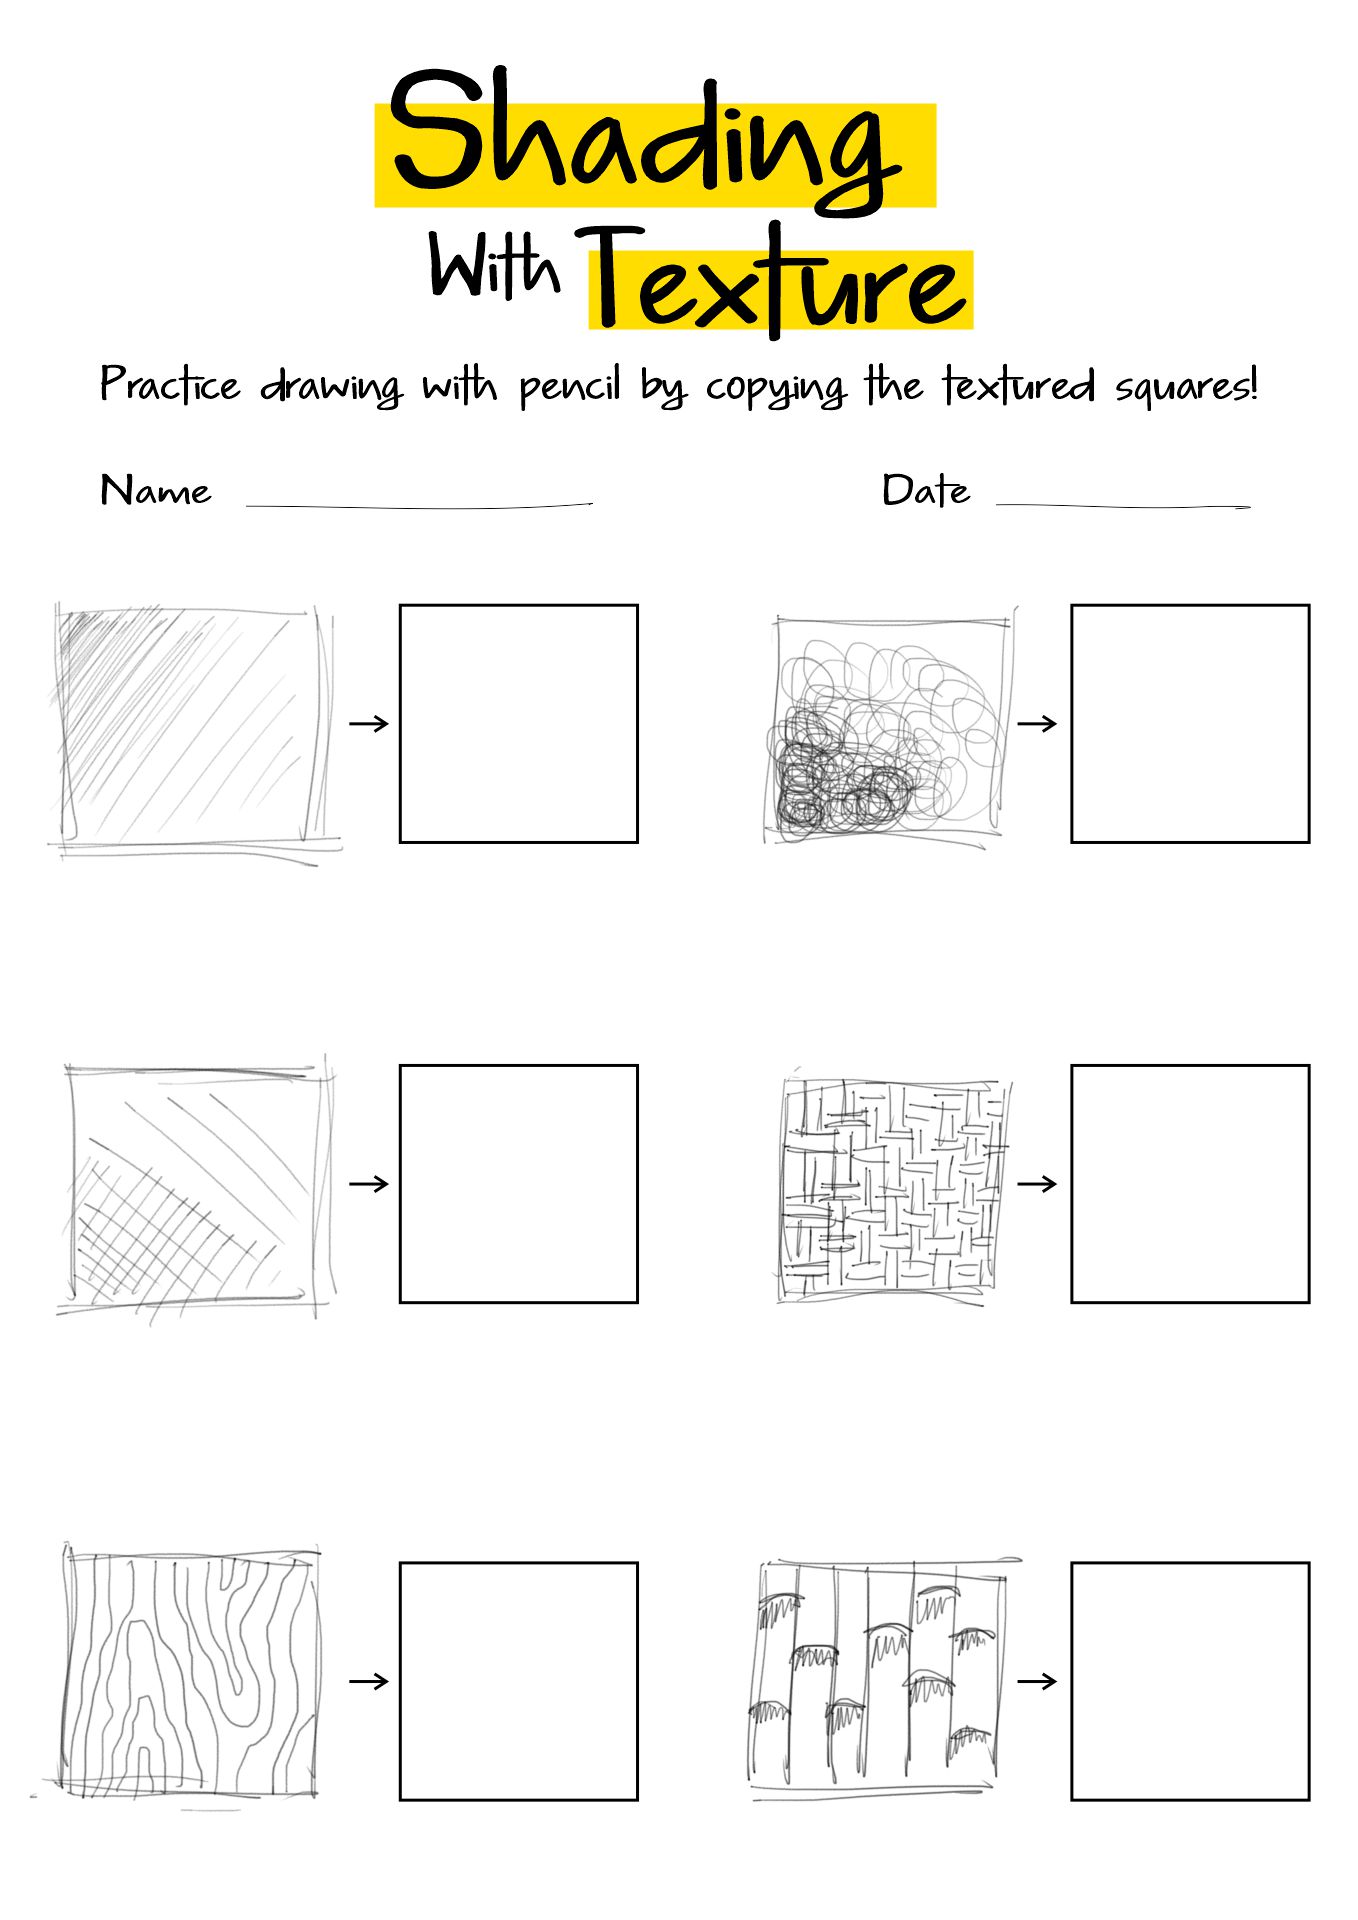 How to Draw Textures Worksheets